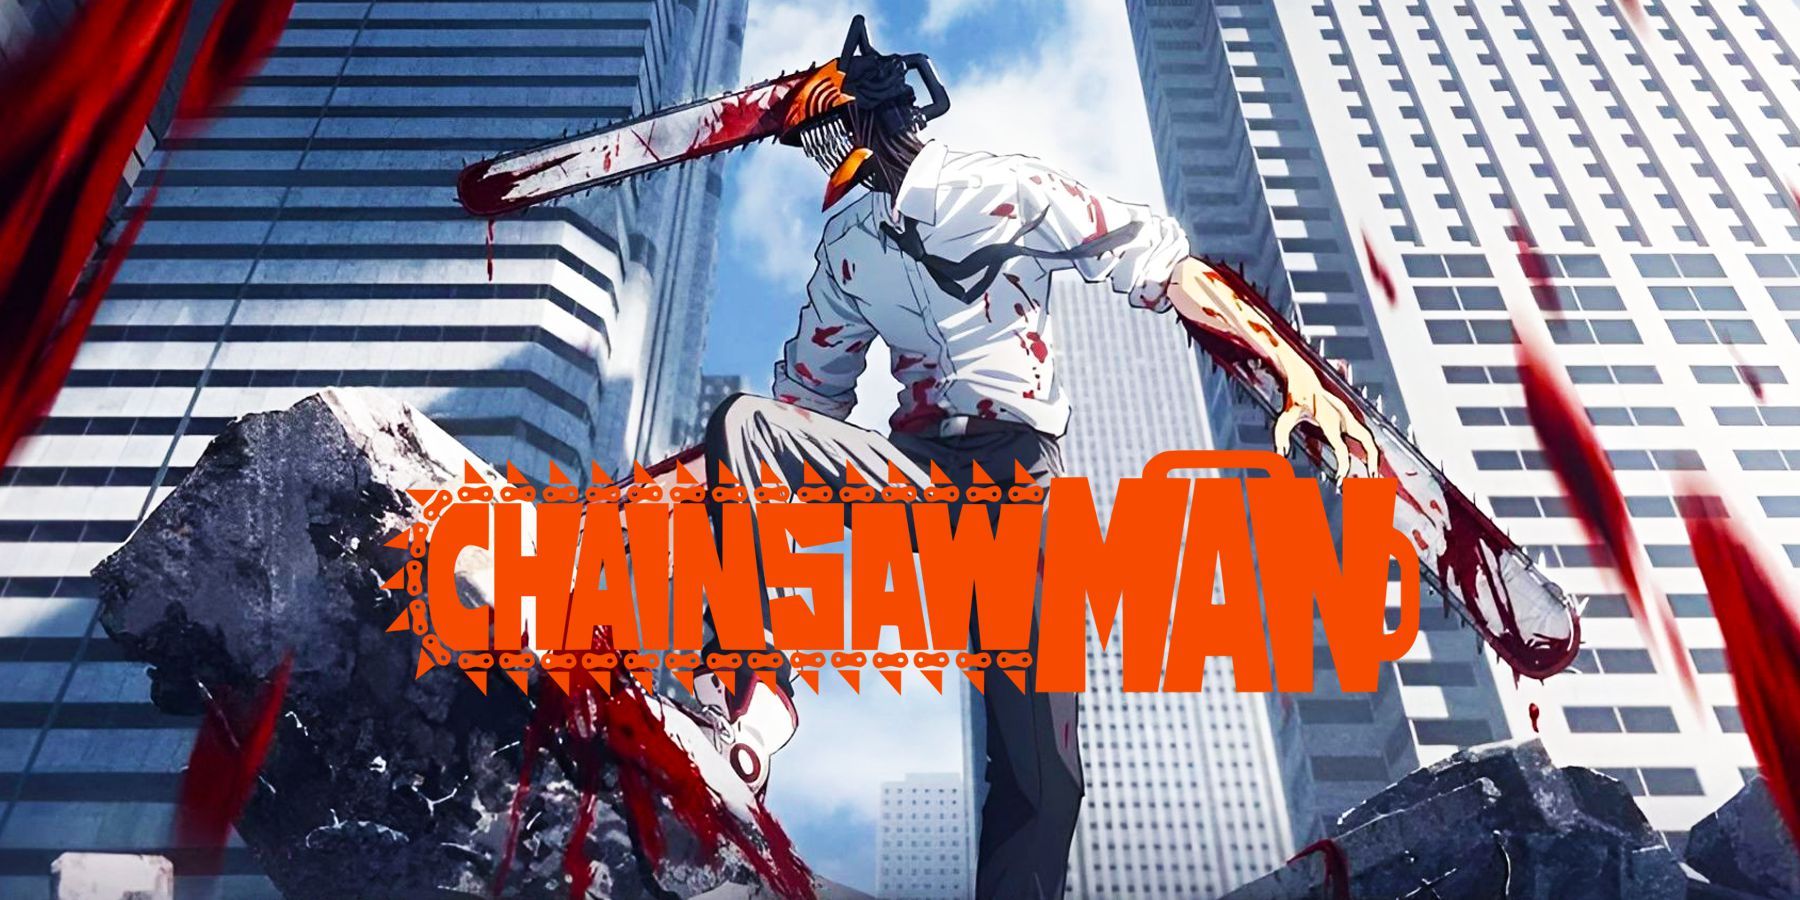 Anime Trending - Chainsaw Man - Episode 8 Preview!